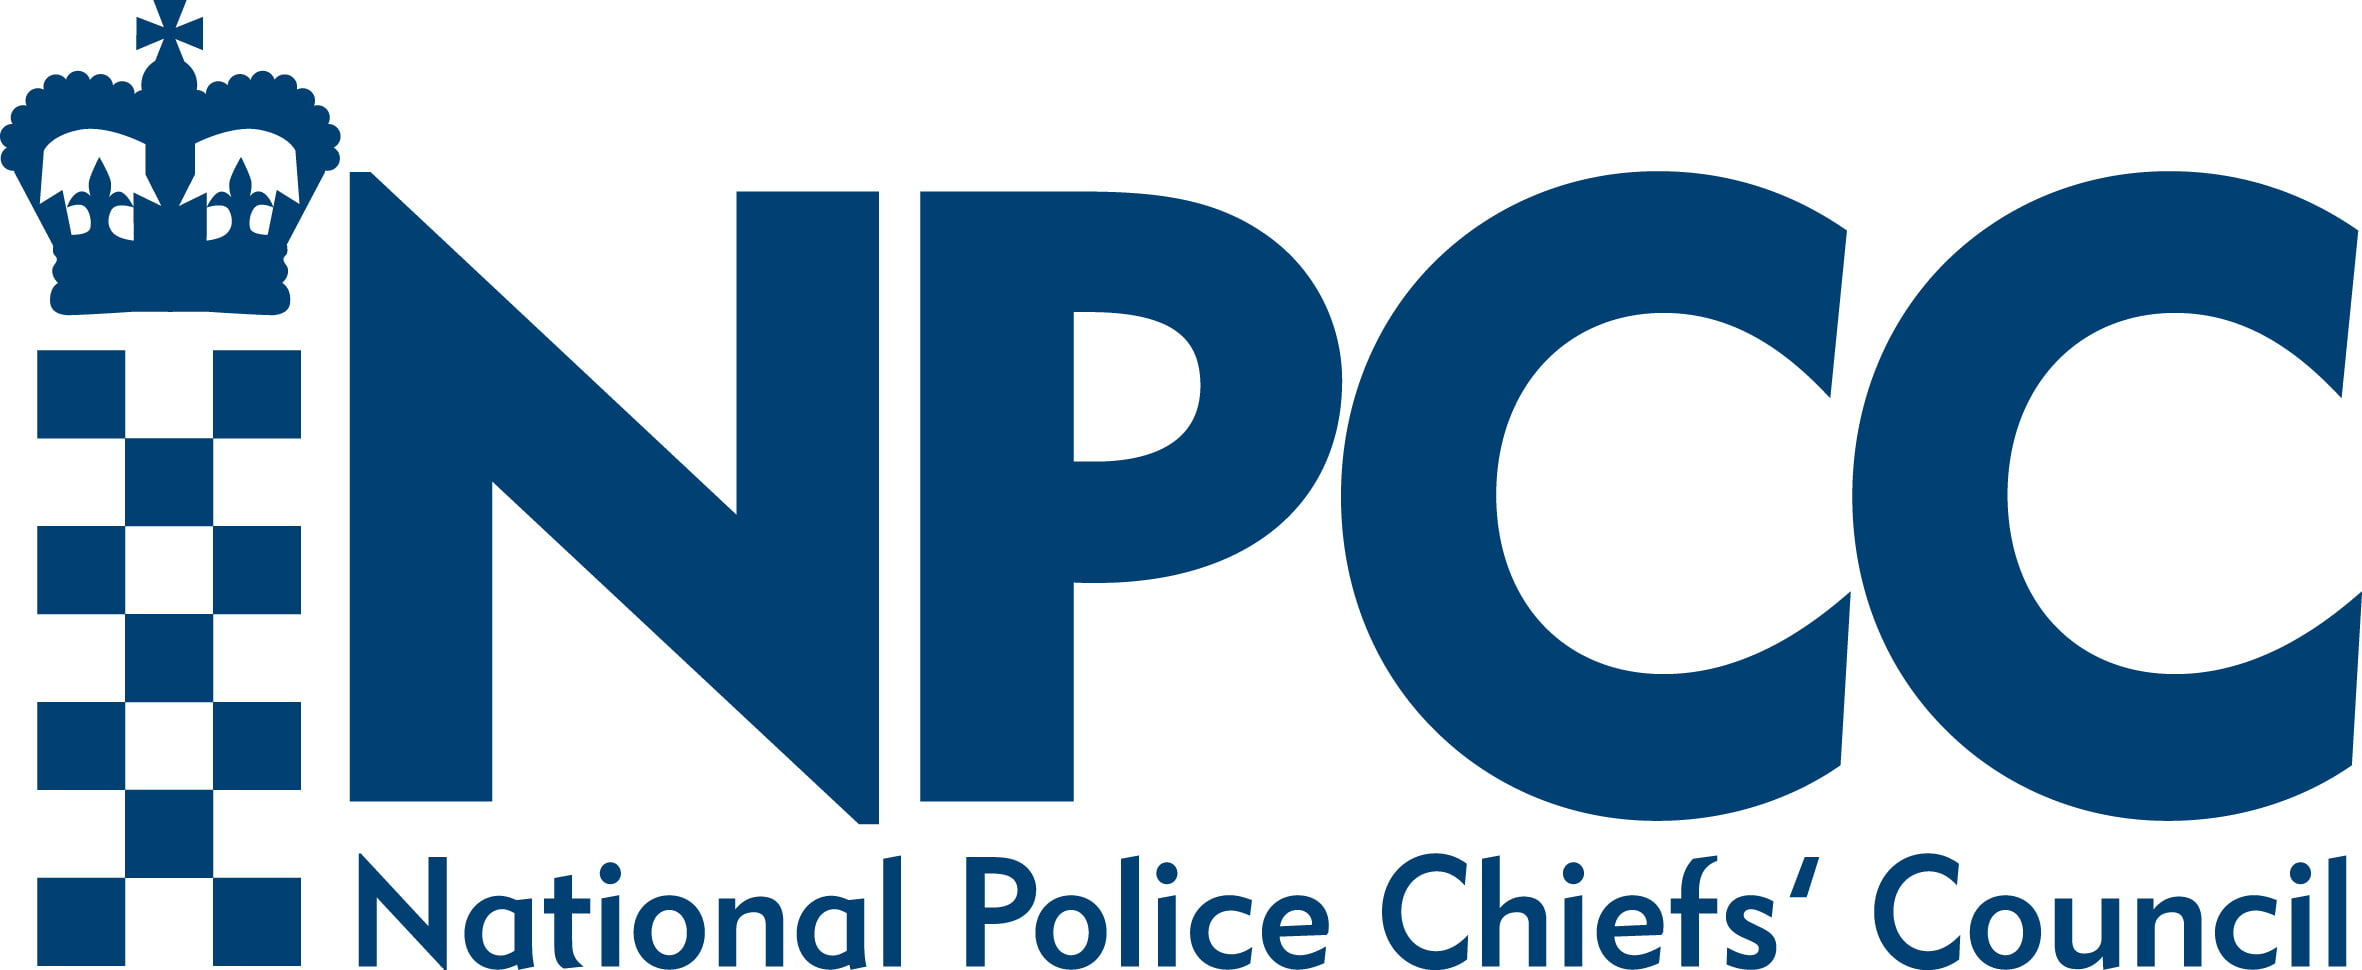 National Police Chiefs' Council